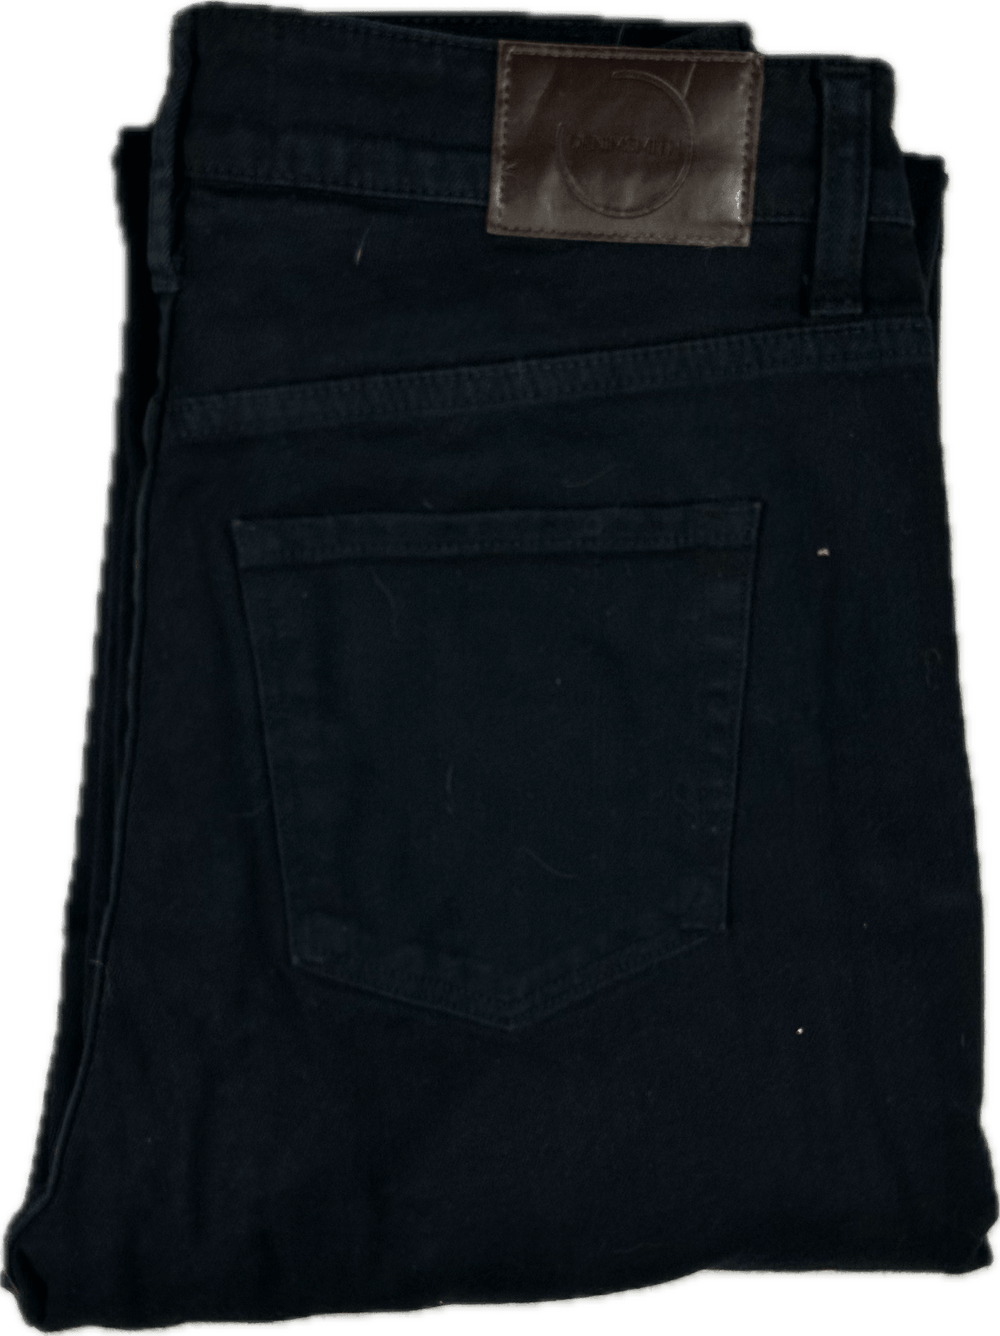 Denimsmith Black High Rise Straight Jeans Made in Melbourne - Size 28 - Jean Pool